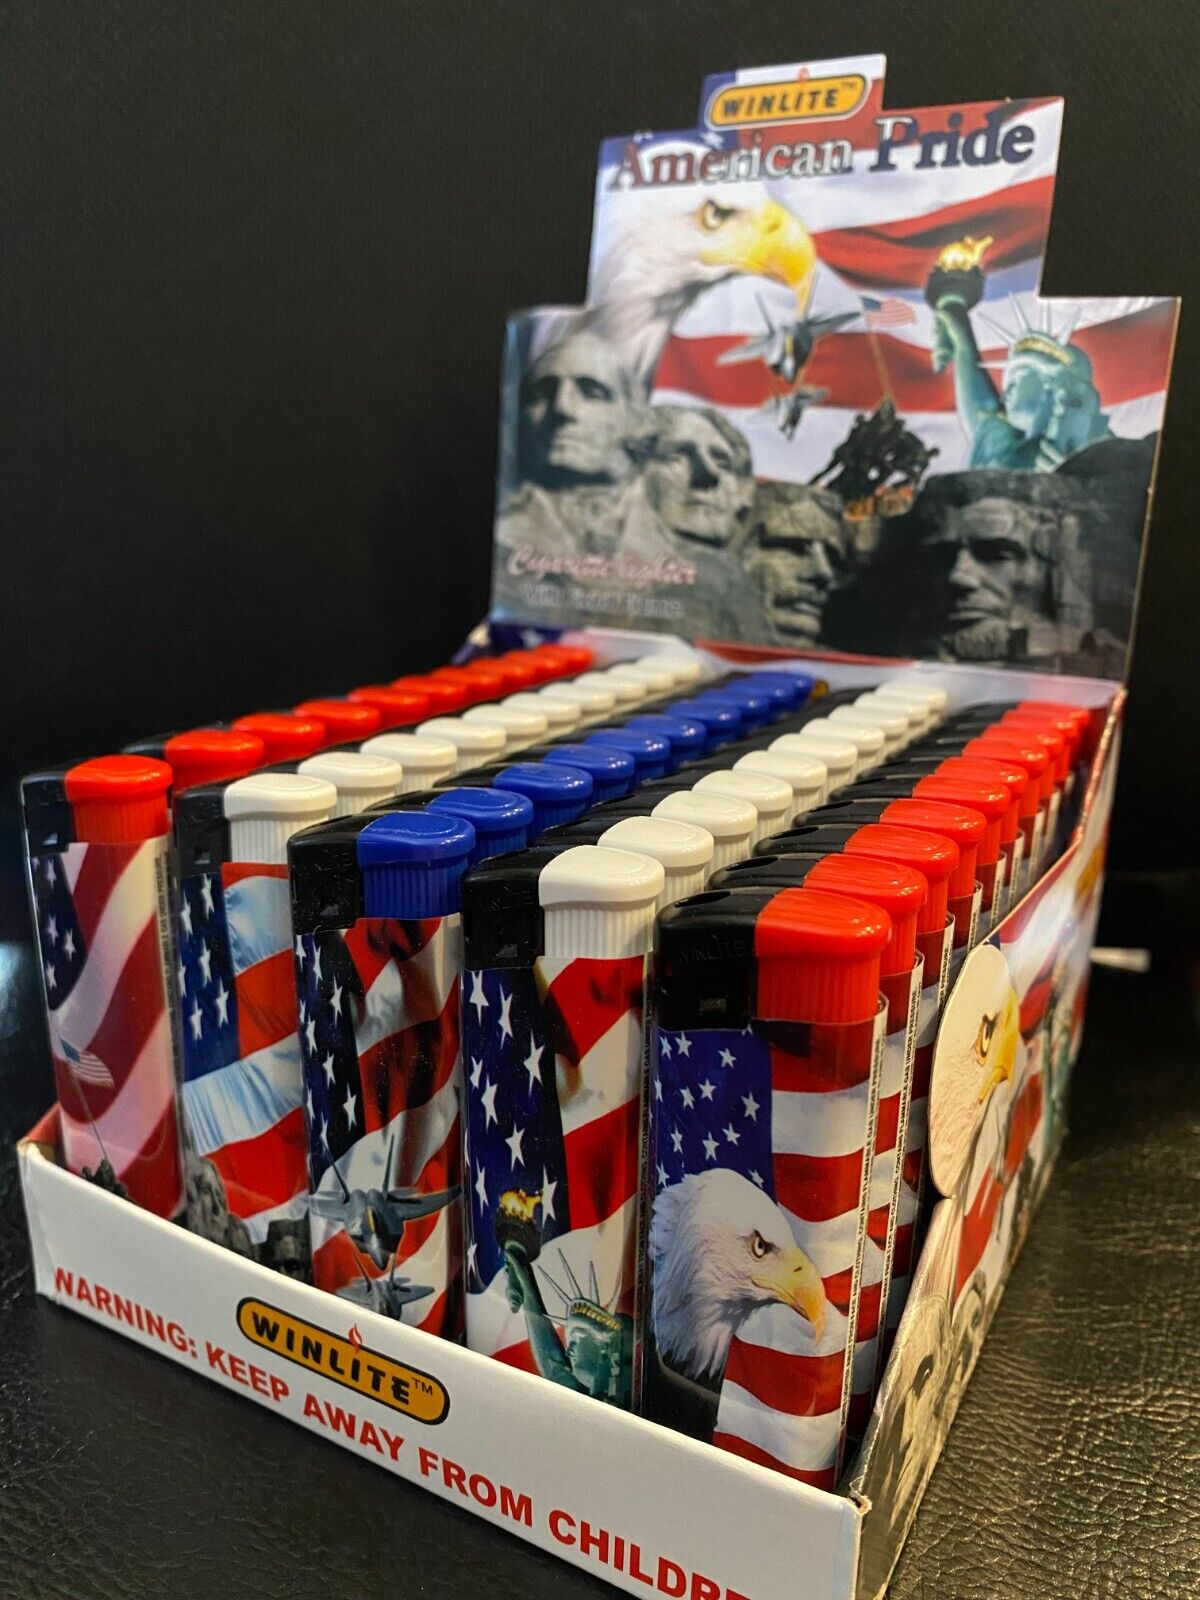 50 PACK American Pride Electric Cigarette Lighters Full Standard Size Wholesale